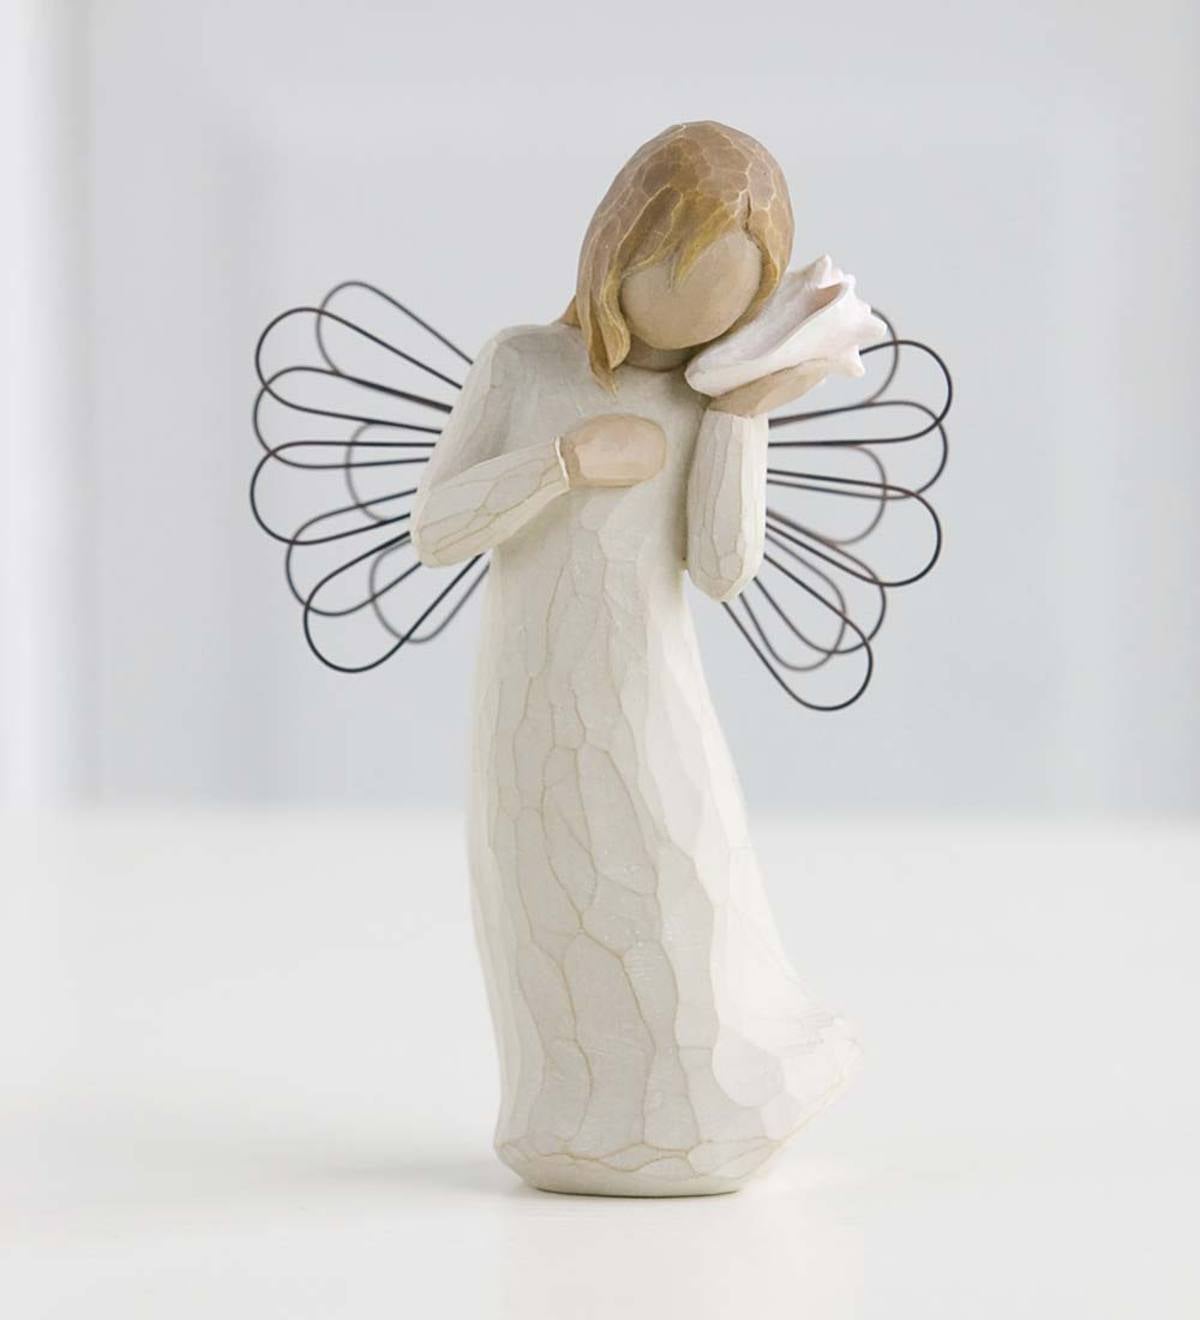 Willow Tree "Thinking of You" Figurine